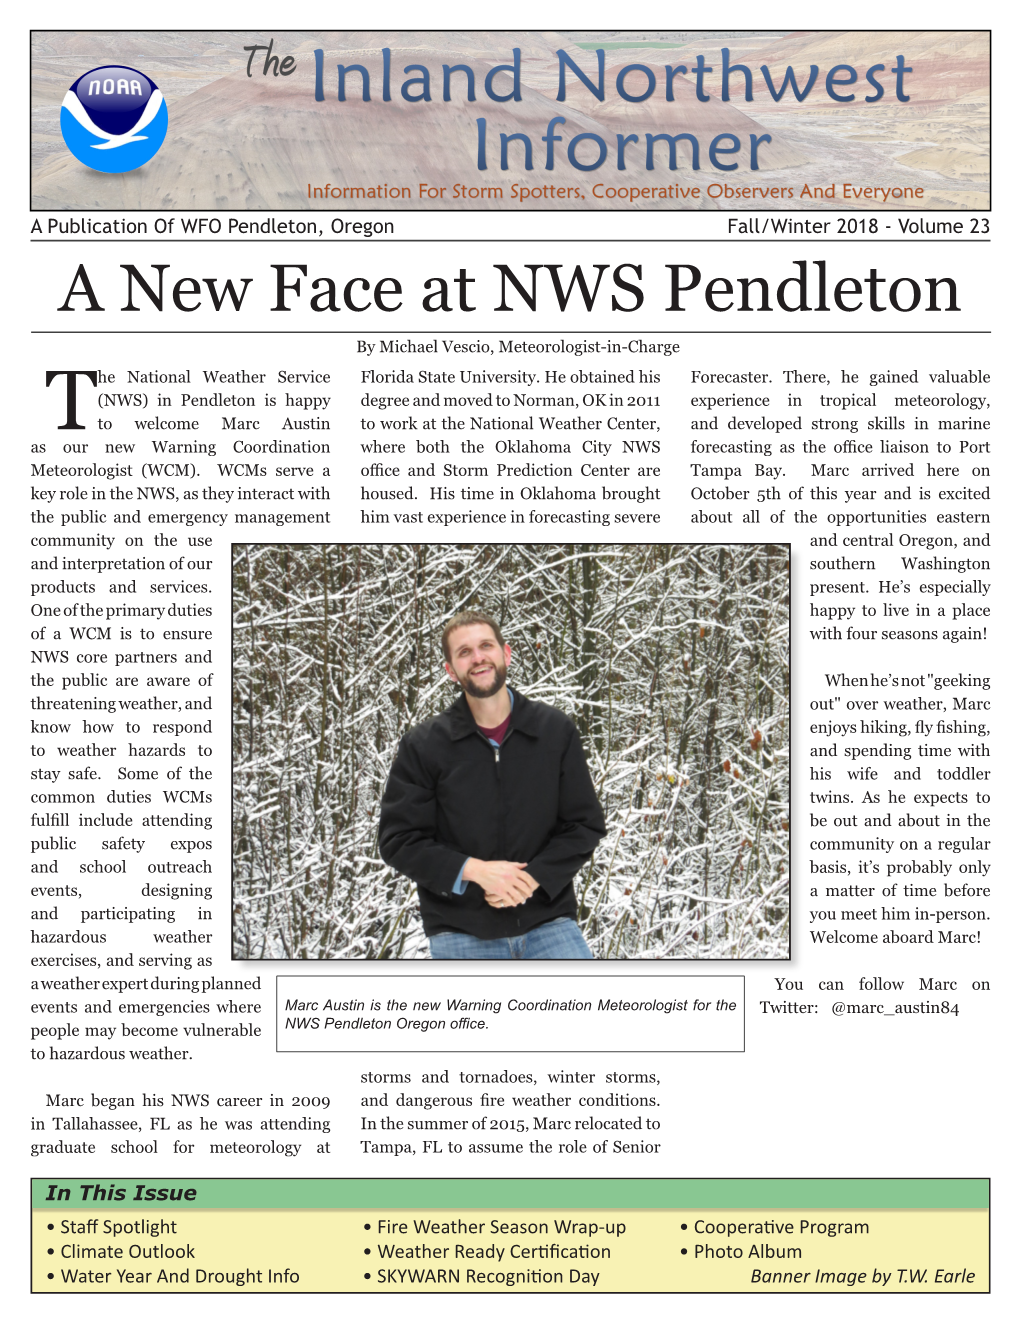 A New Face at NWS Pendleton by Michael Vescio, Meteorologist-In-Charge He National Weather Service Florida State University